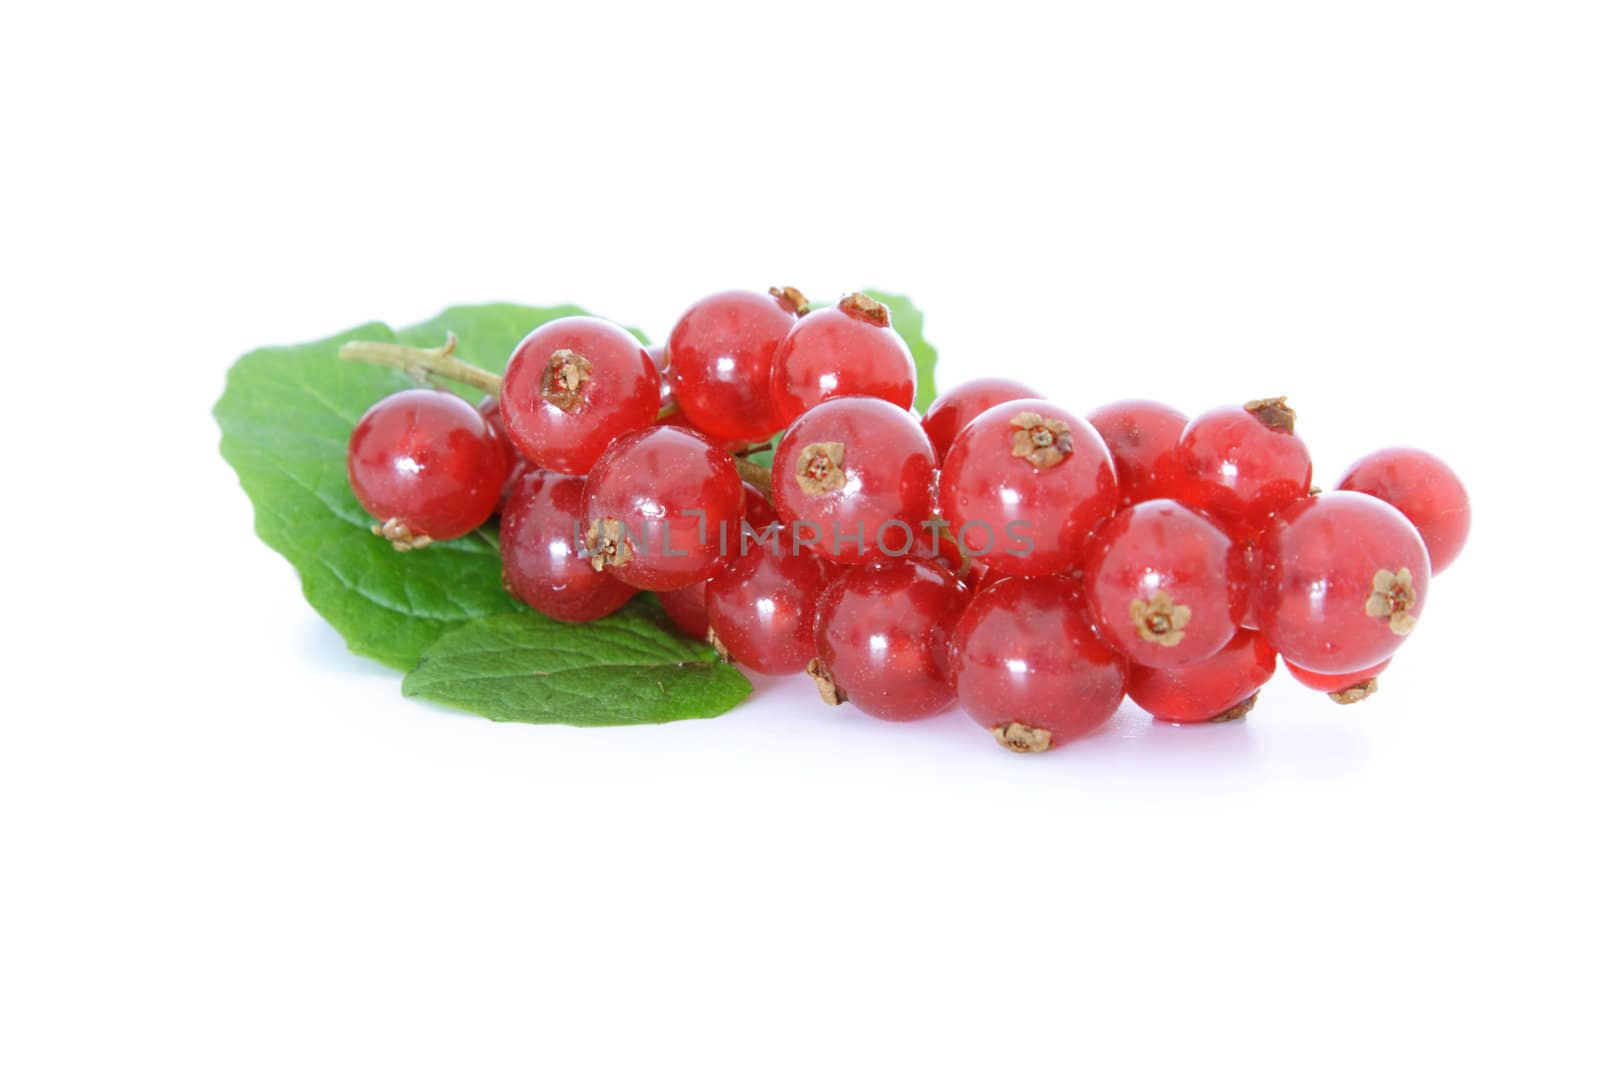 Red currant on white background.